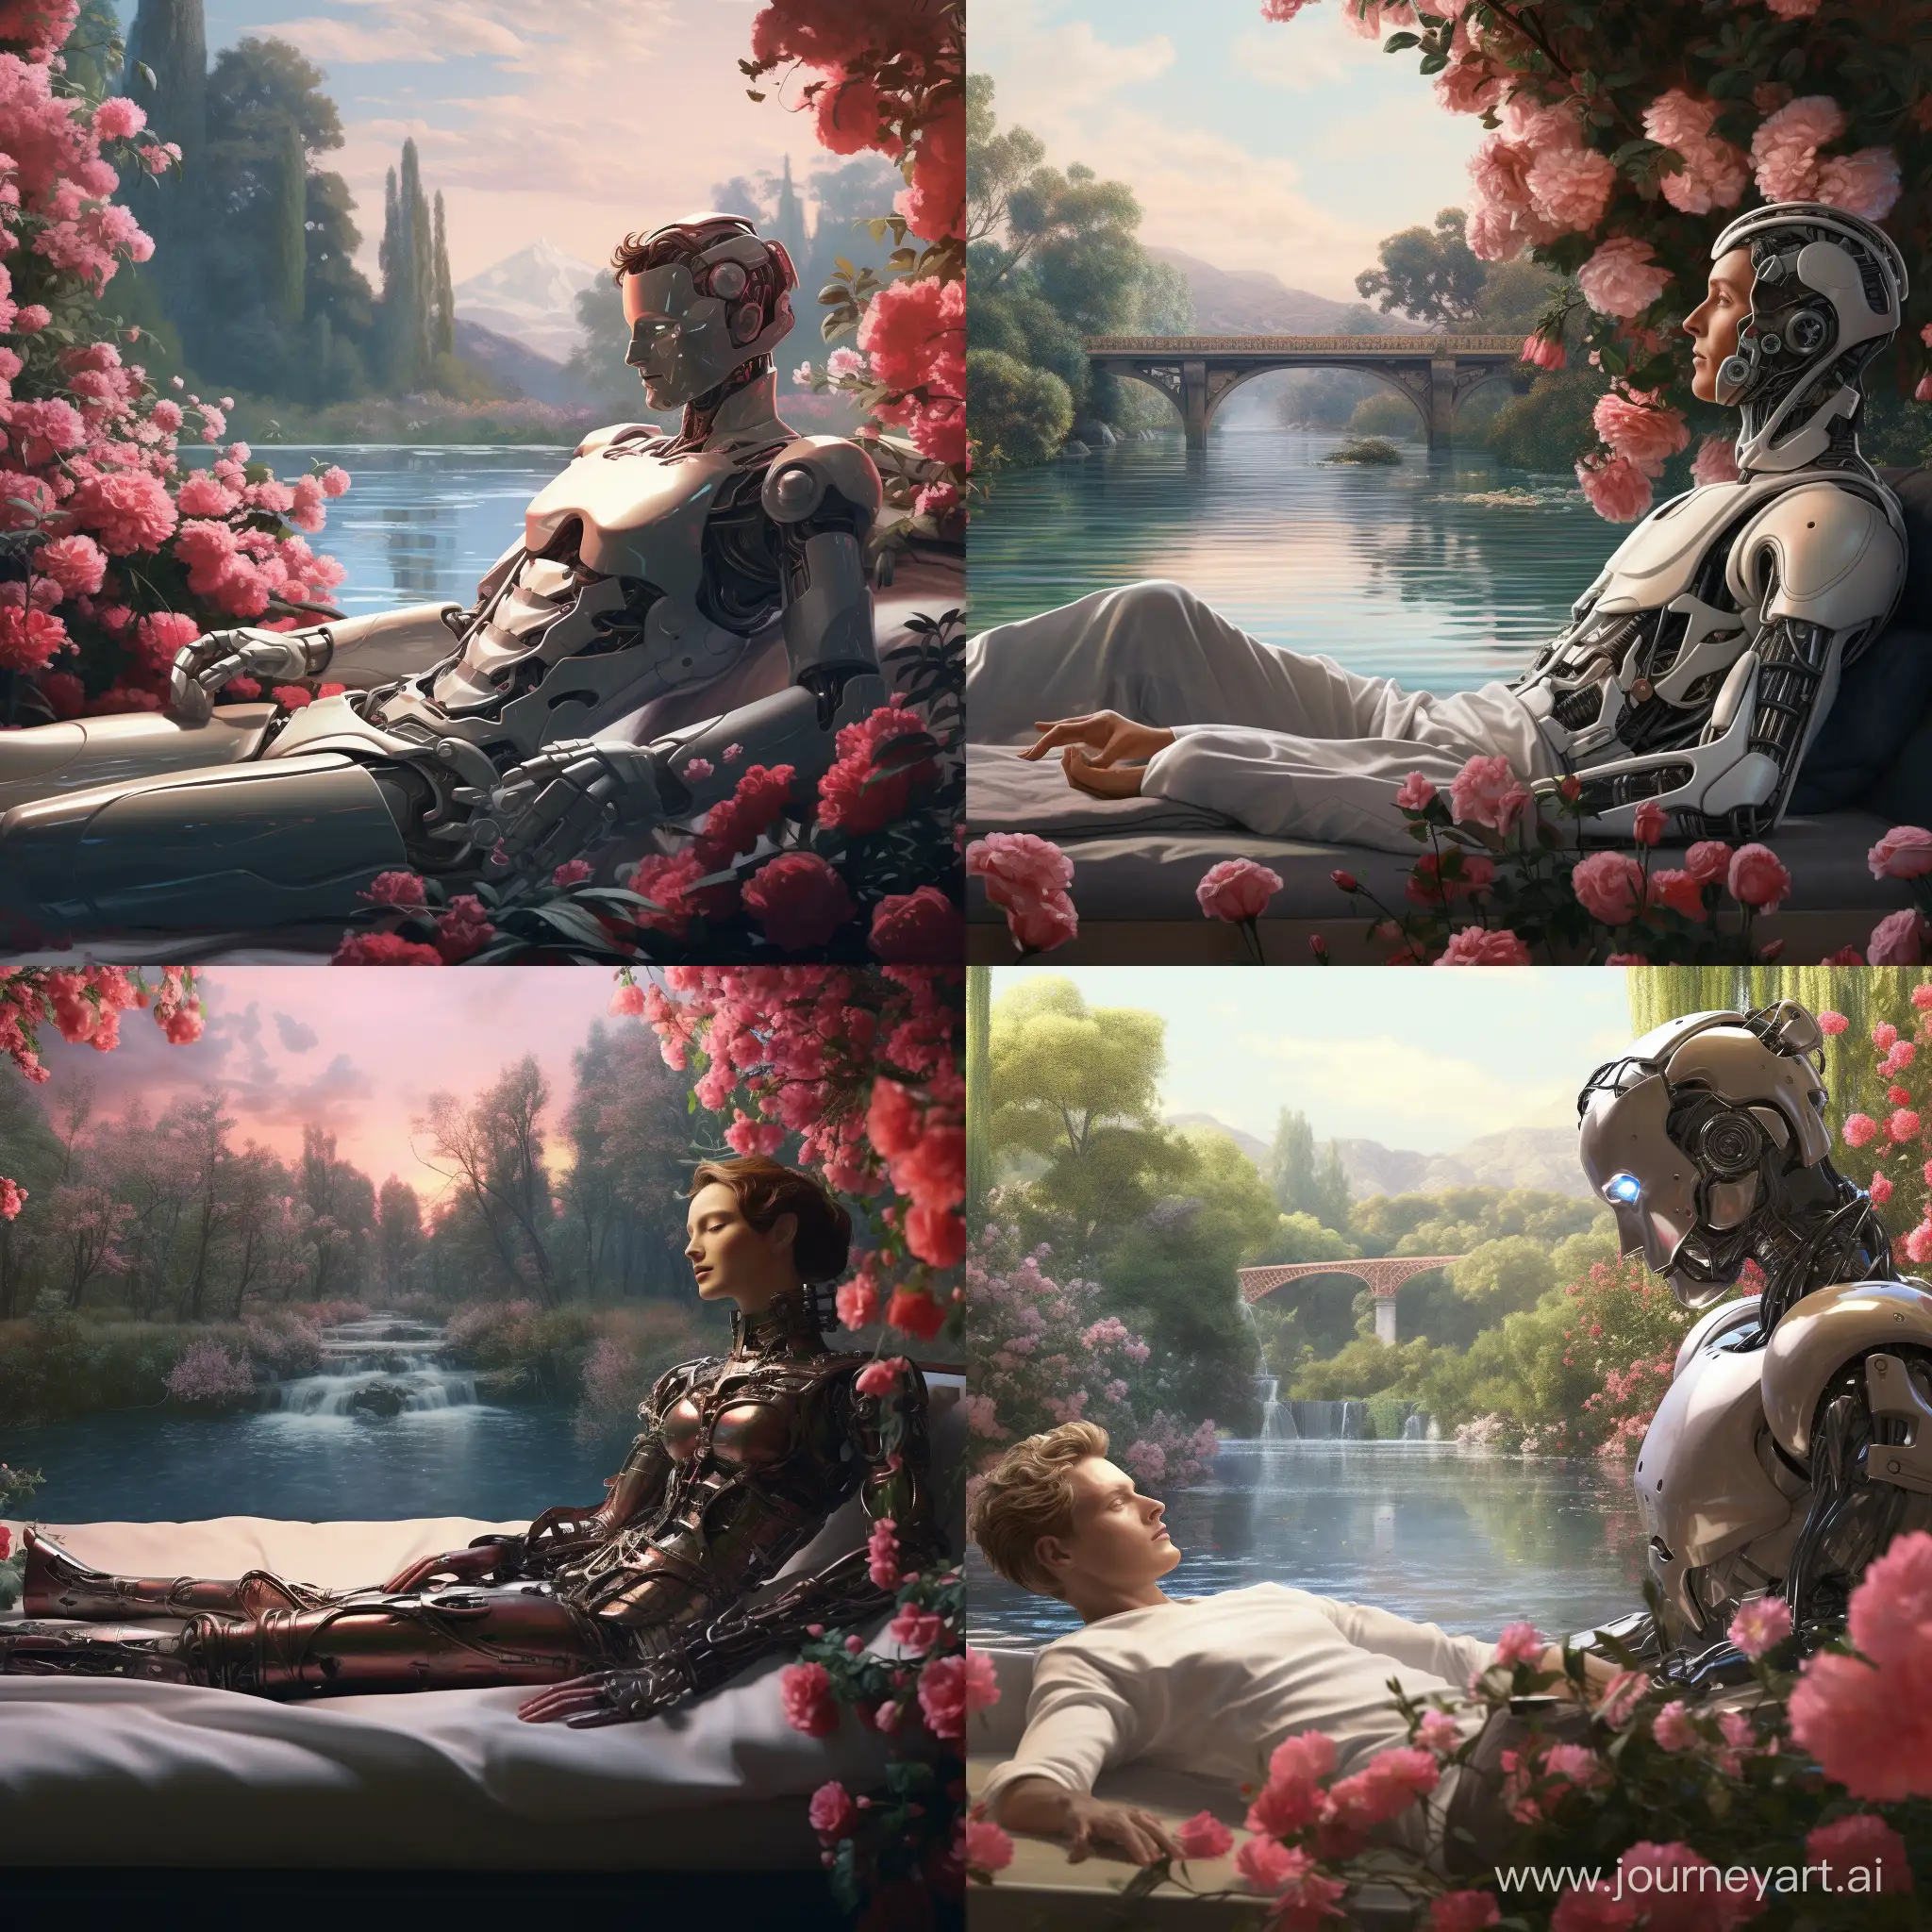 AI-Robot-Admiring-Man-Floating-on-River-Bed-in-Rose-Garden